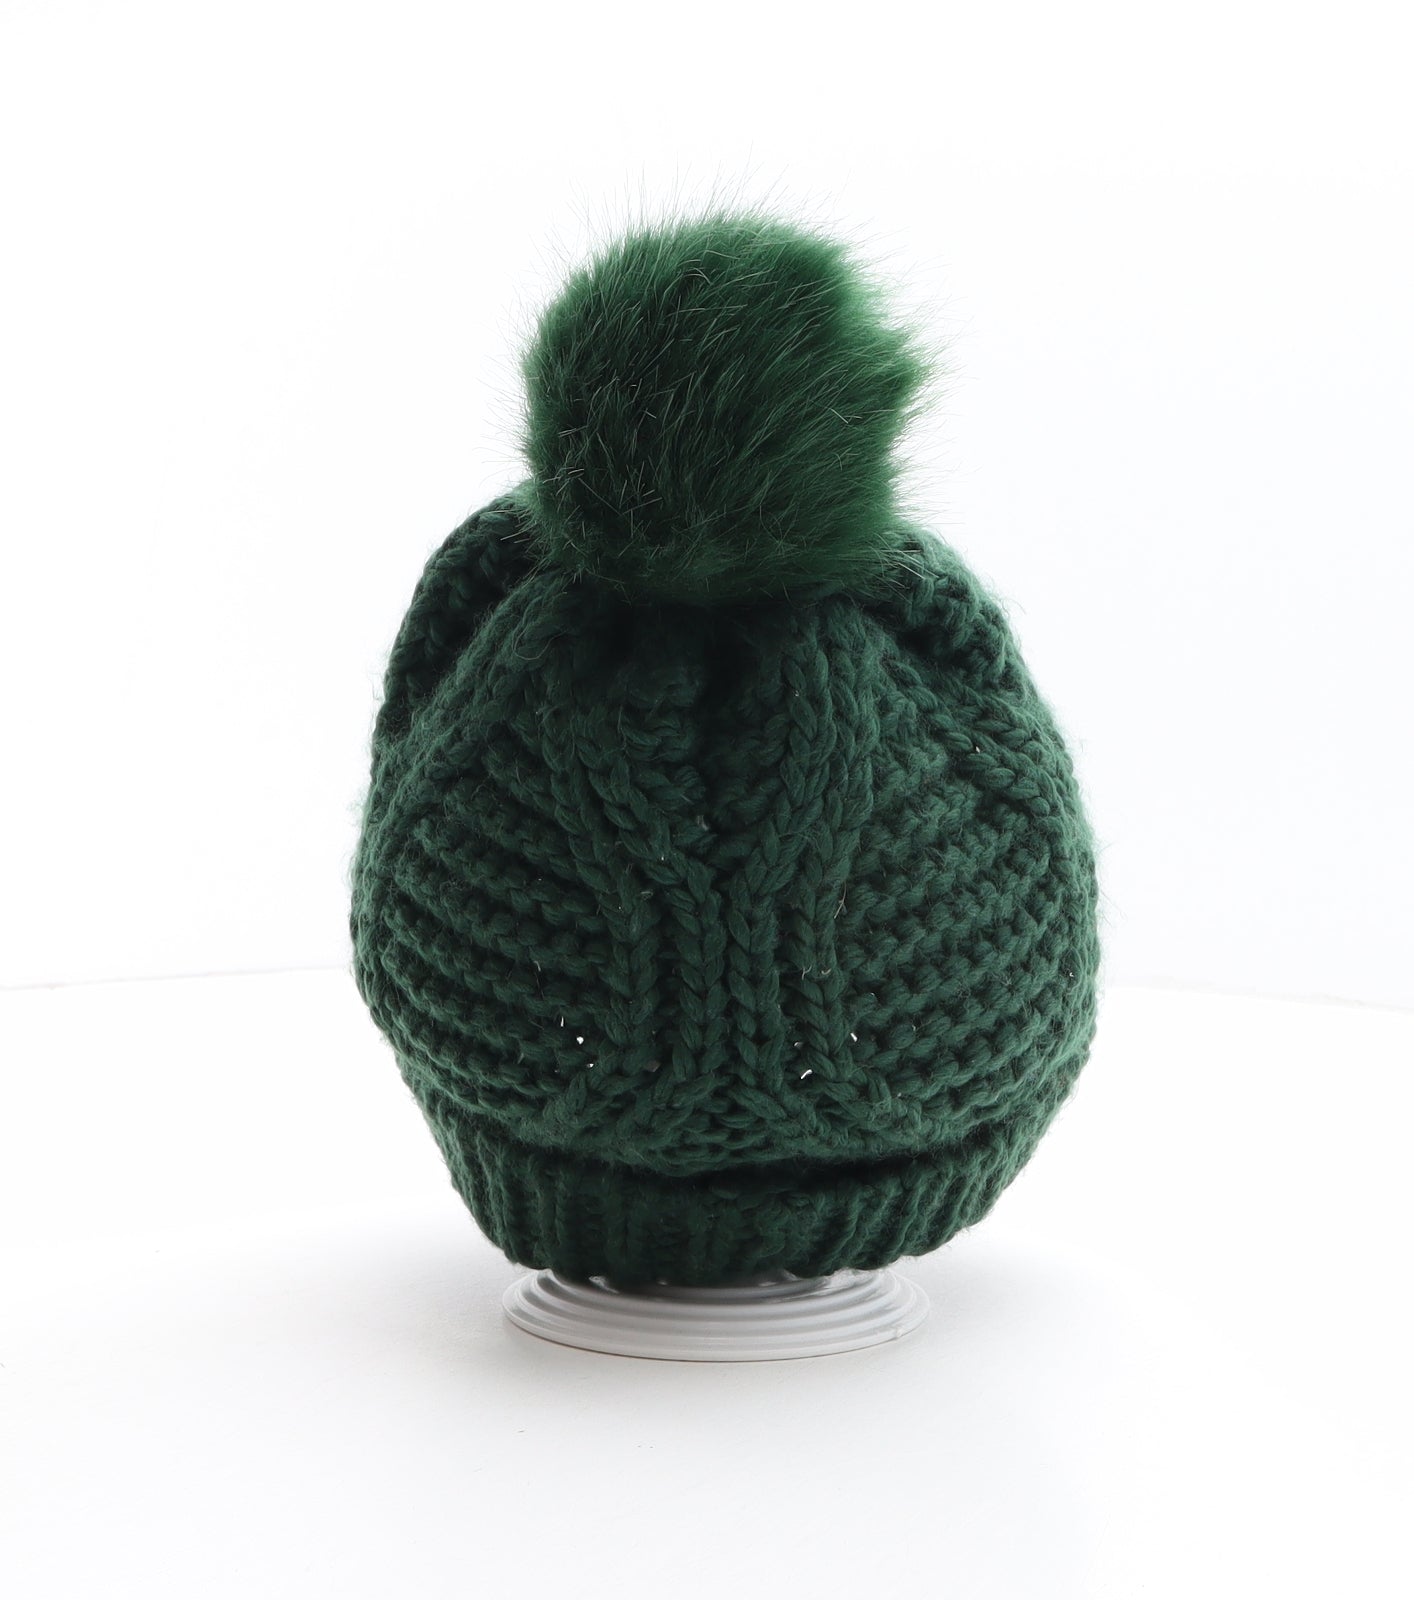 Topshop Womens Green Acrylic Bobble Hat One Size